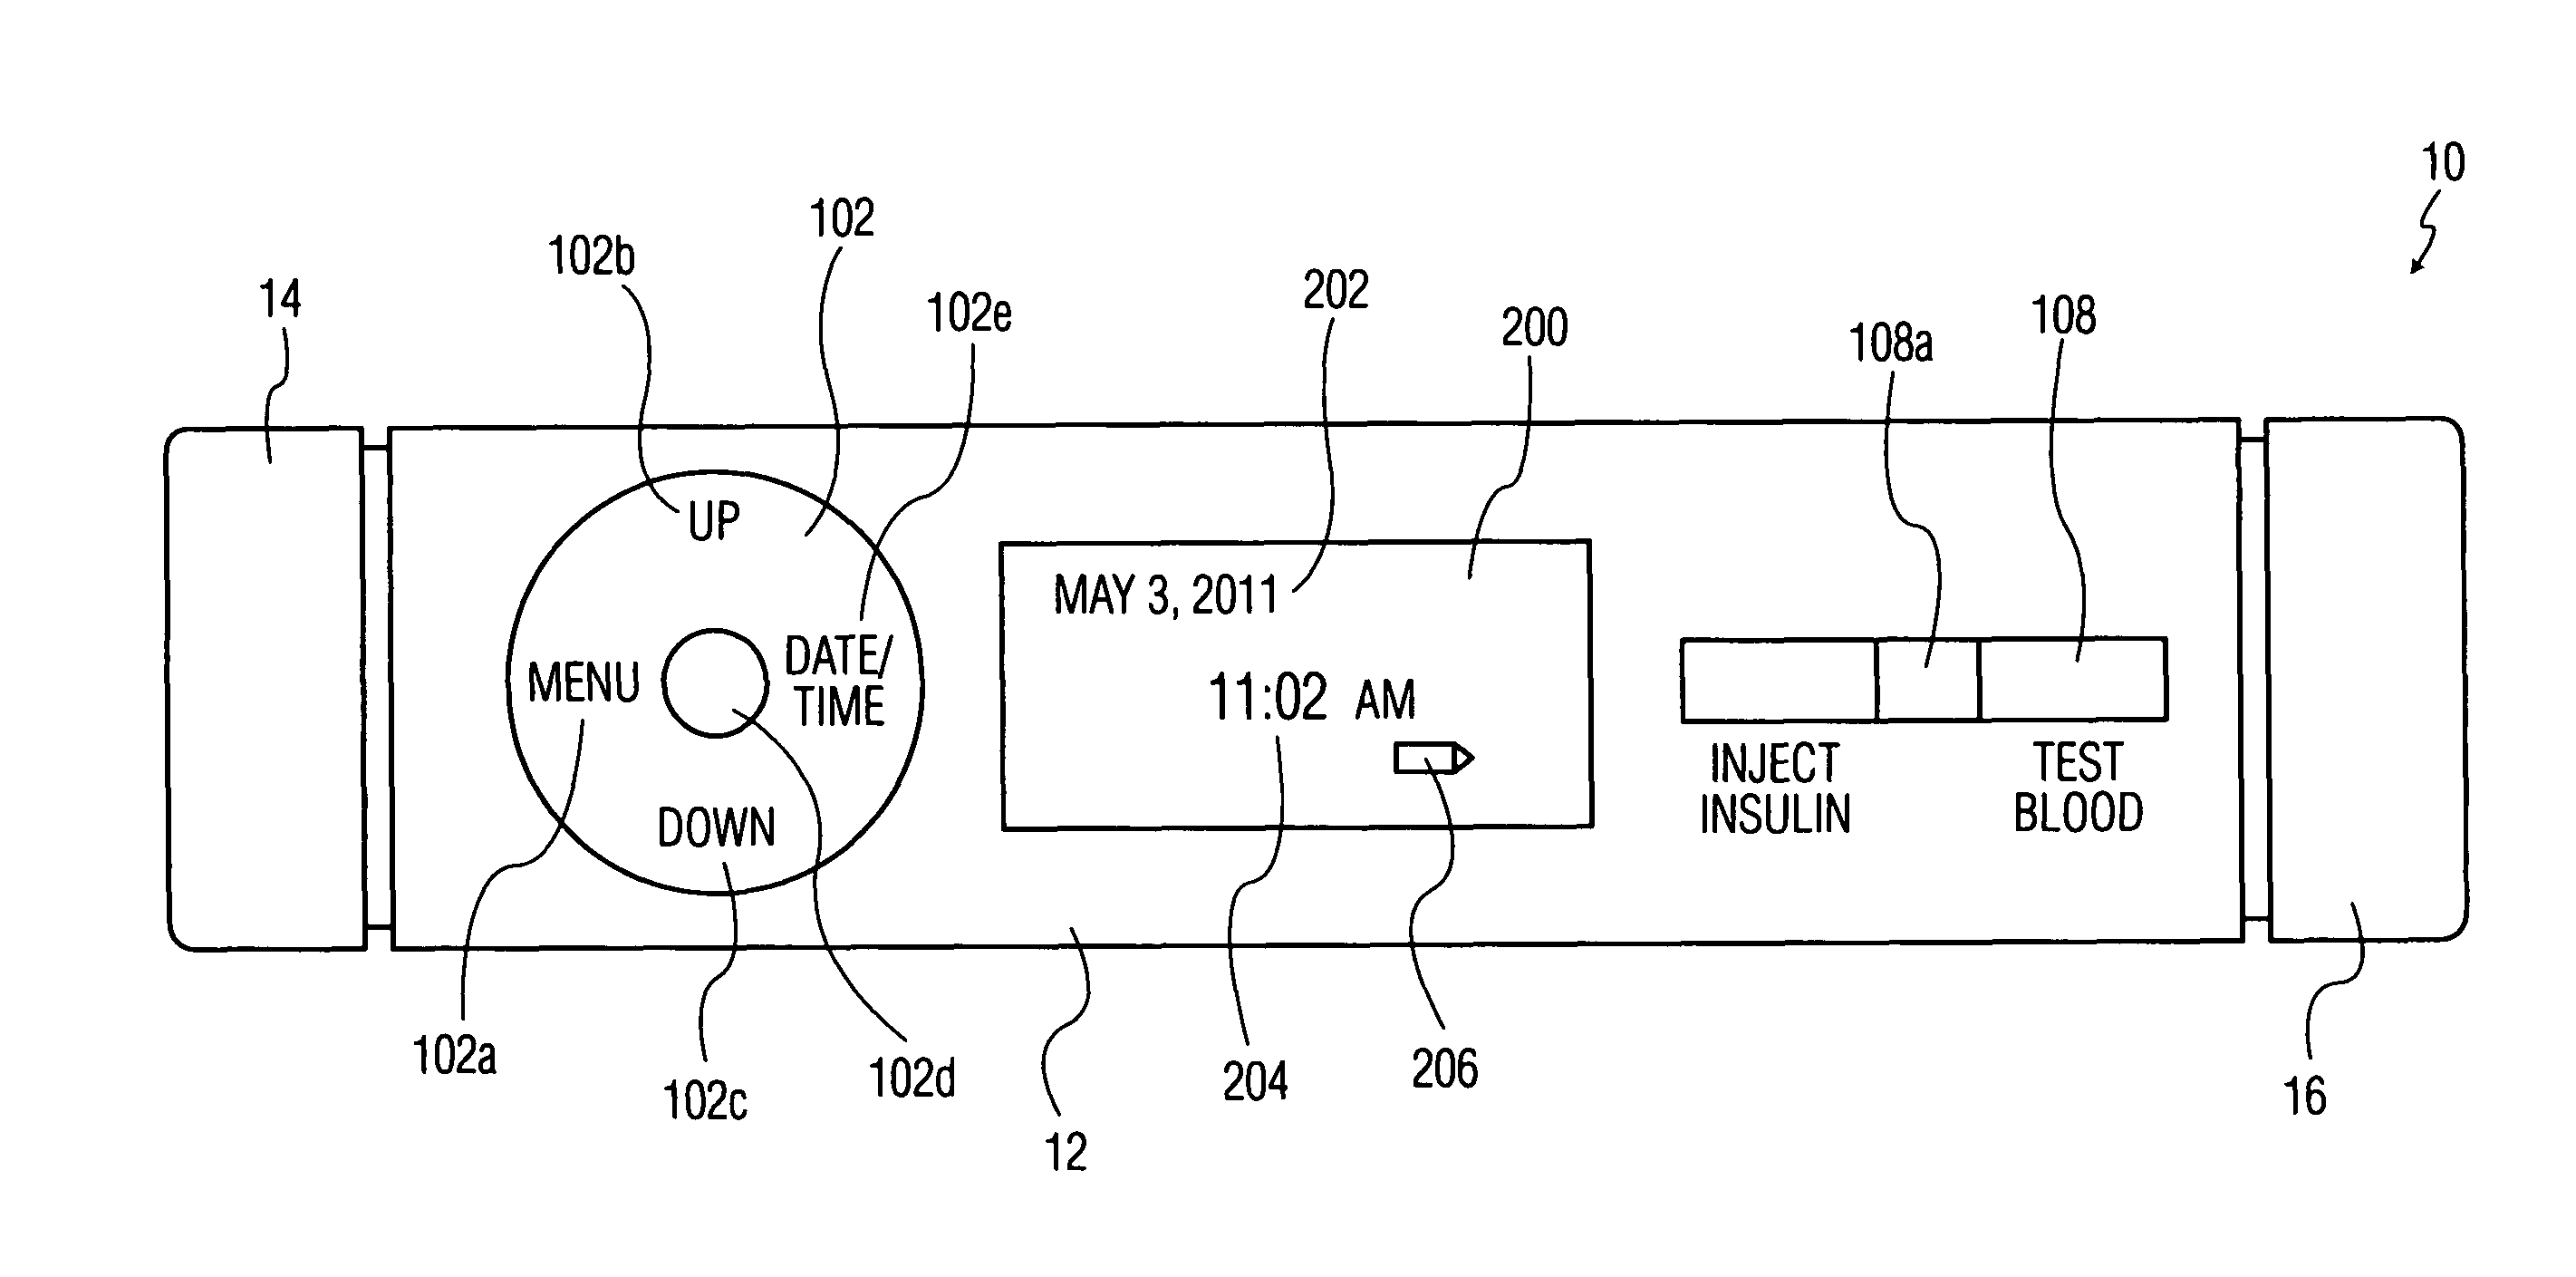 Integrated glucose monitor and insulin injection pen with automatic emergency notification